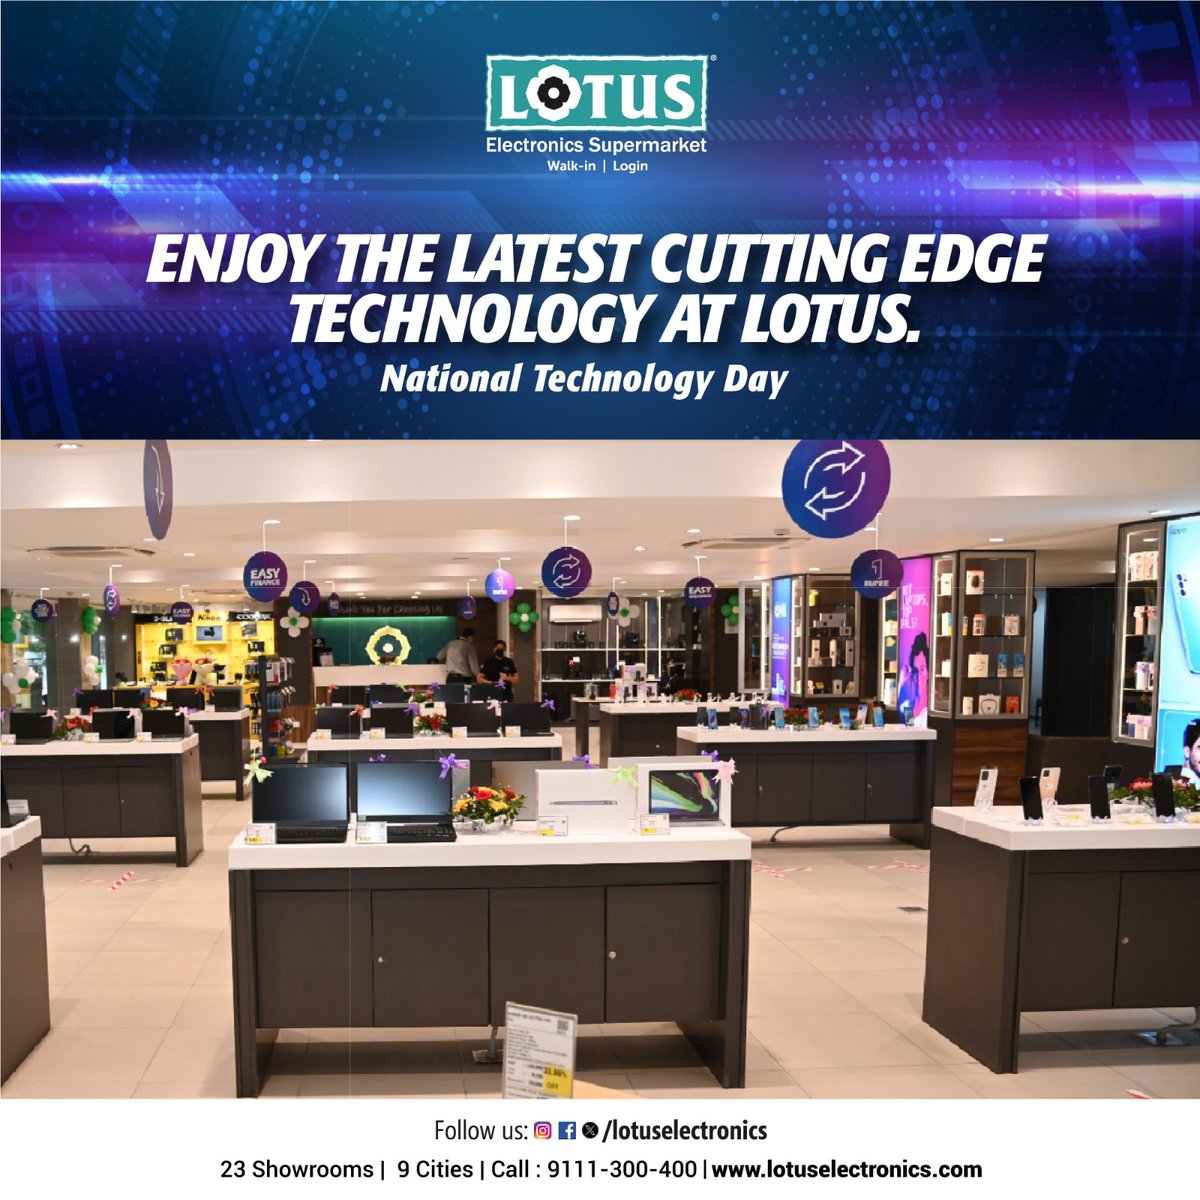 Happy National Technology Day! Today, we recognize and celebrate the incredible achievements and innovations in technology that have revolutionized our world.
#NationalTechnologyDay #Innovation #TechAdvancements #DigitalTransformation #TechInnovations #lotuselectronics